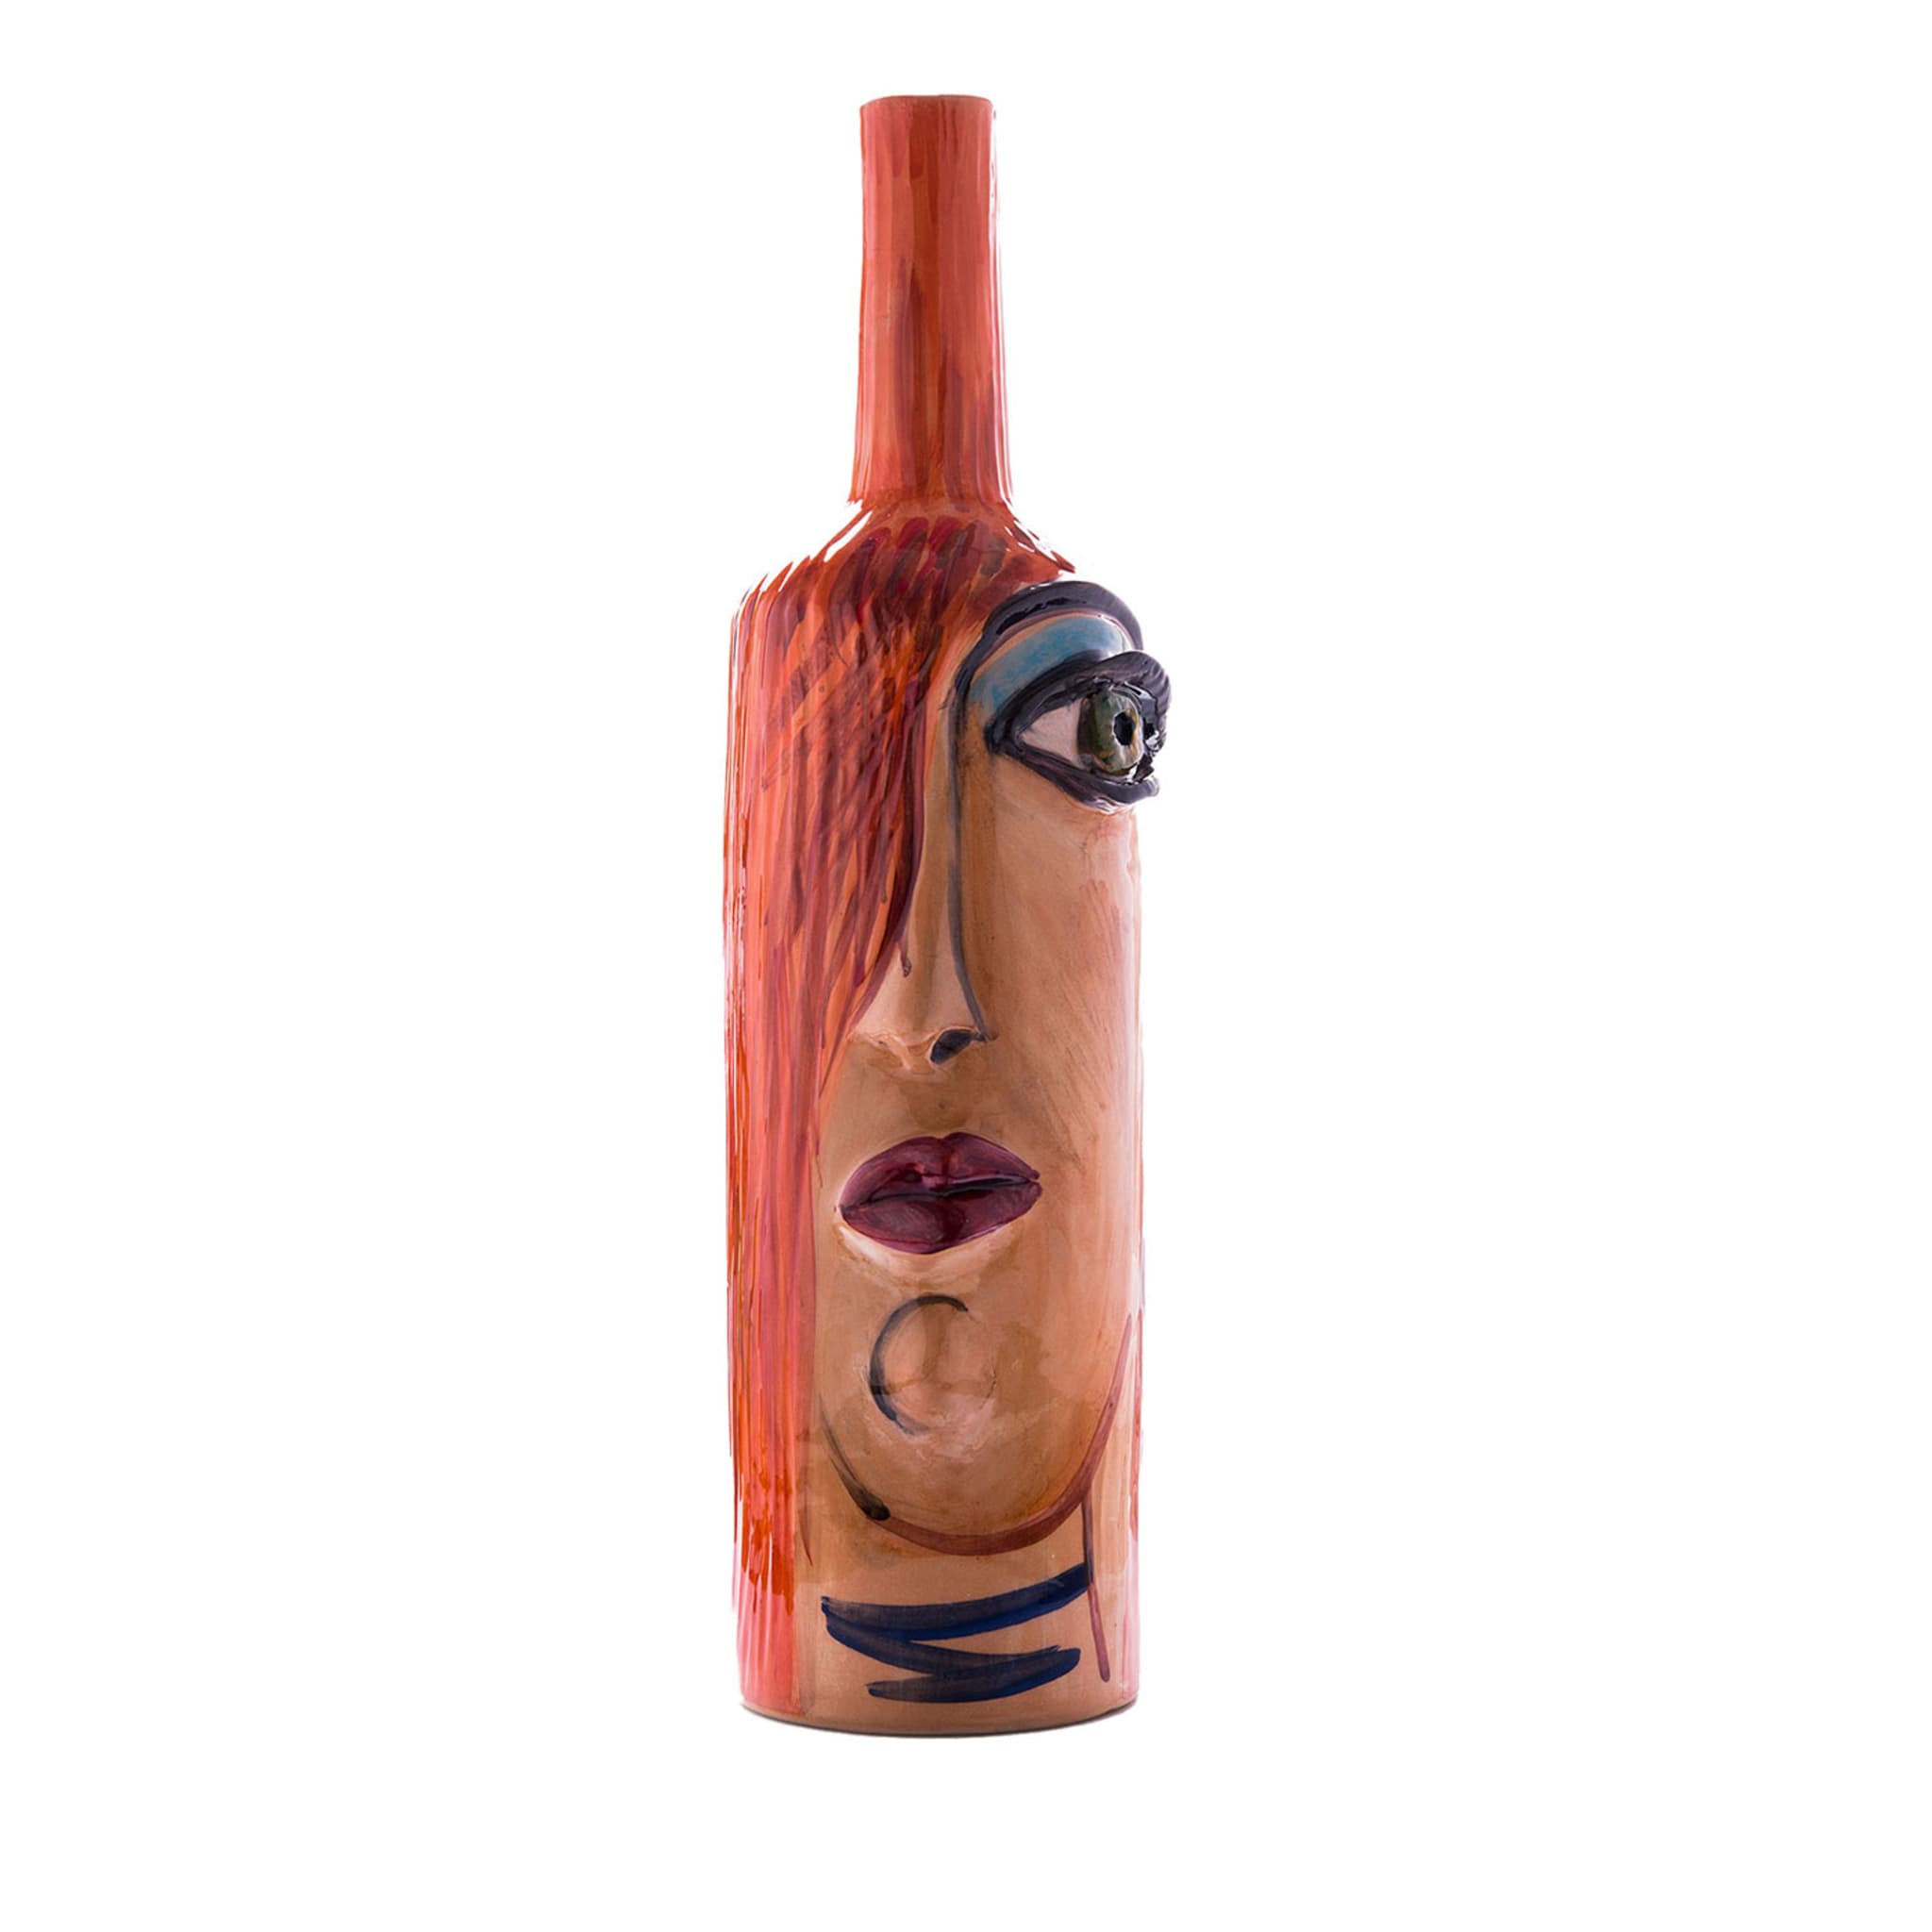 Anthropomorphic-Inspired H45 Polychrome Bottle/Sculpture #1 - Main view